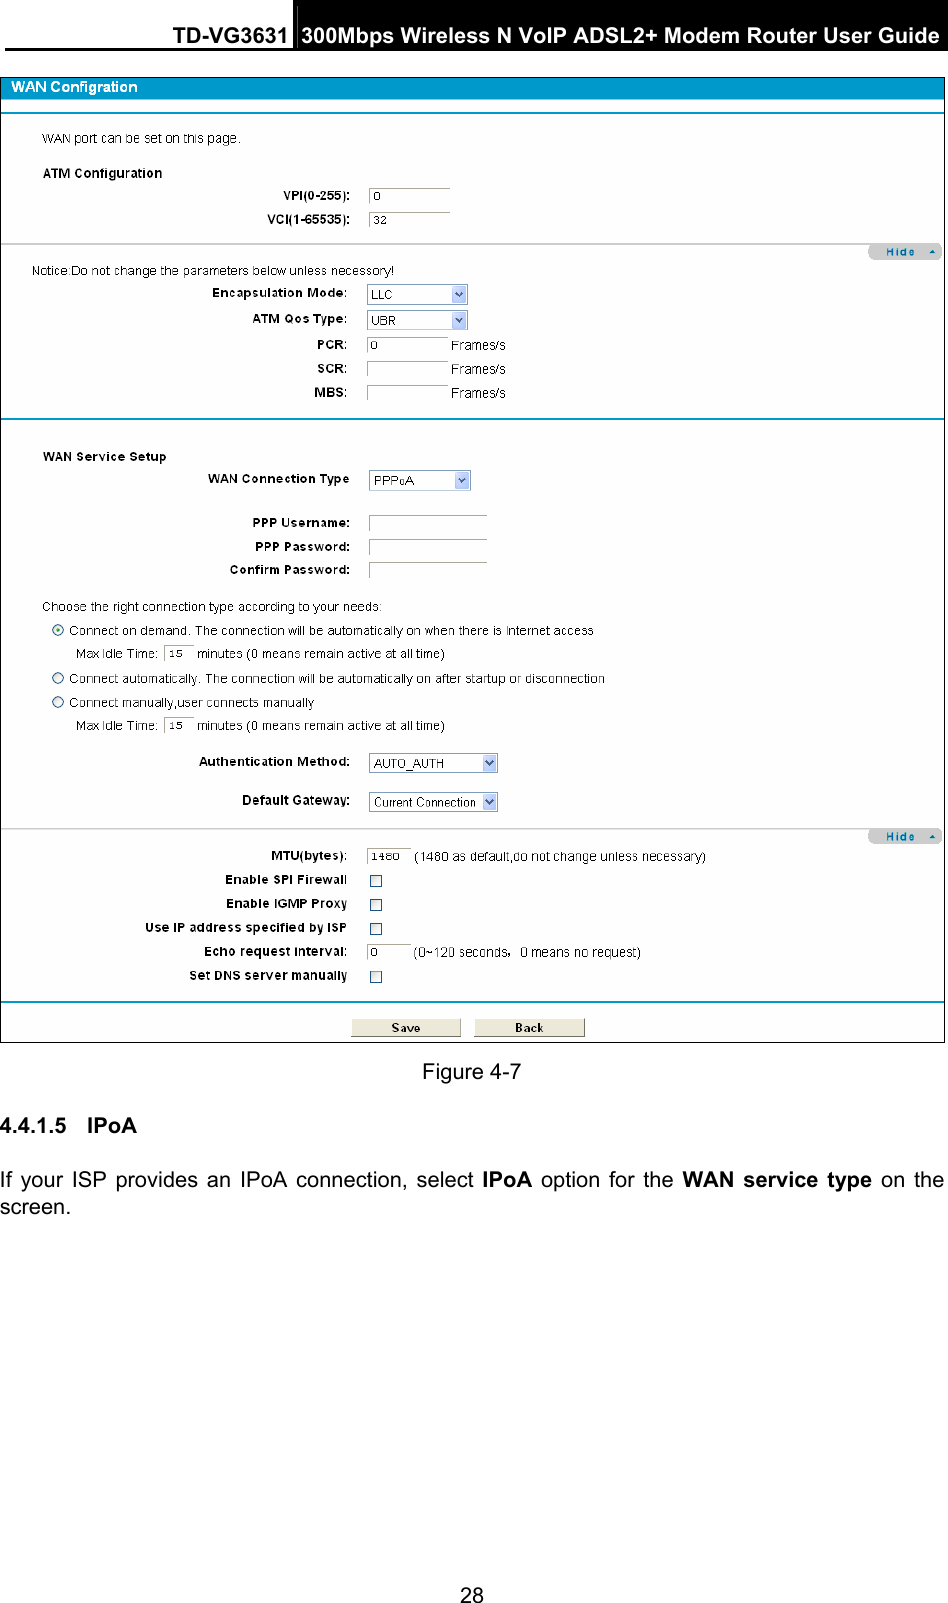 TD-VG3631 300Mbps Wireless N VoIP ADSL2+ Modem Router User Guide 28  Figure 4-7 4.4.1.5  IPoA  If your ISP provides an IPoA connection, select IPoA option for the WAN service type on the screen. 